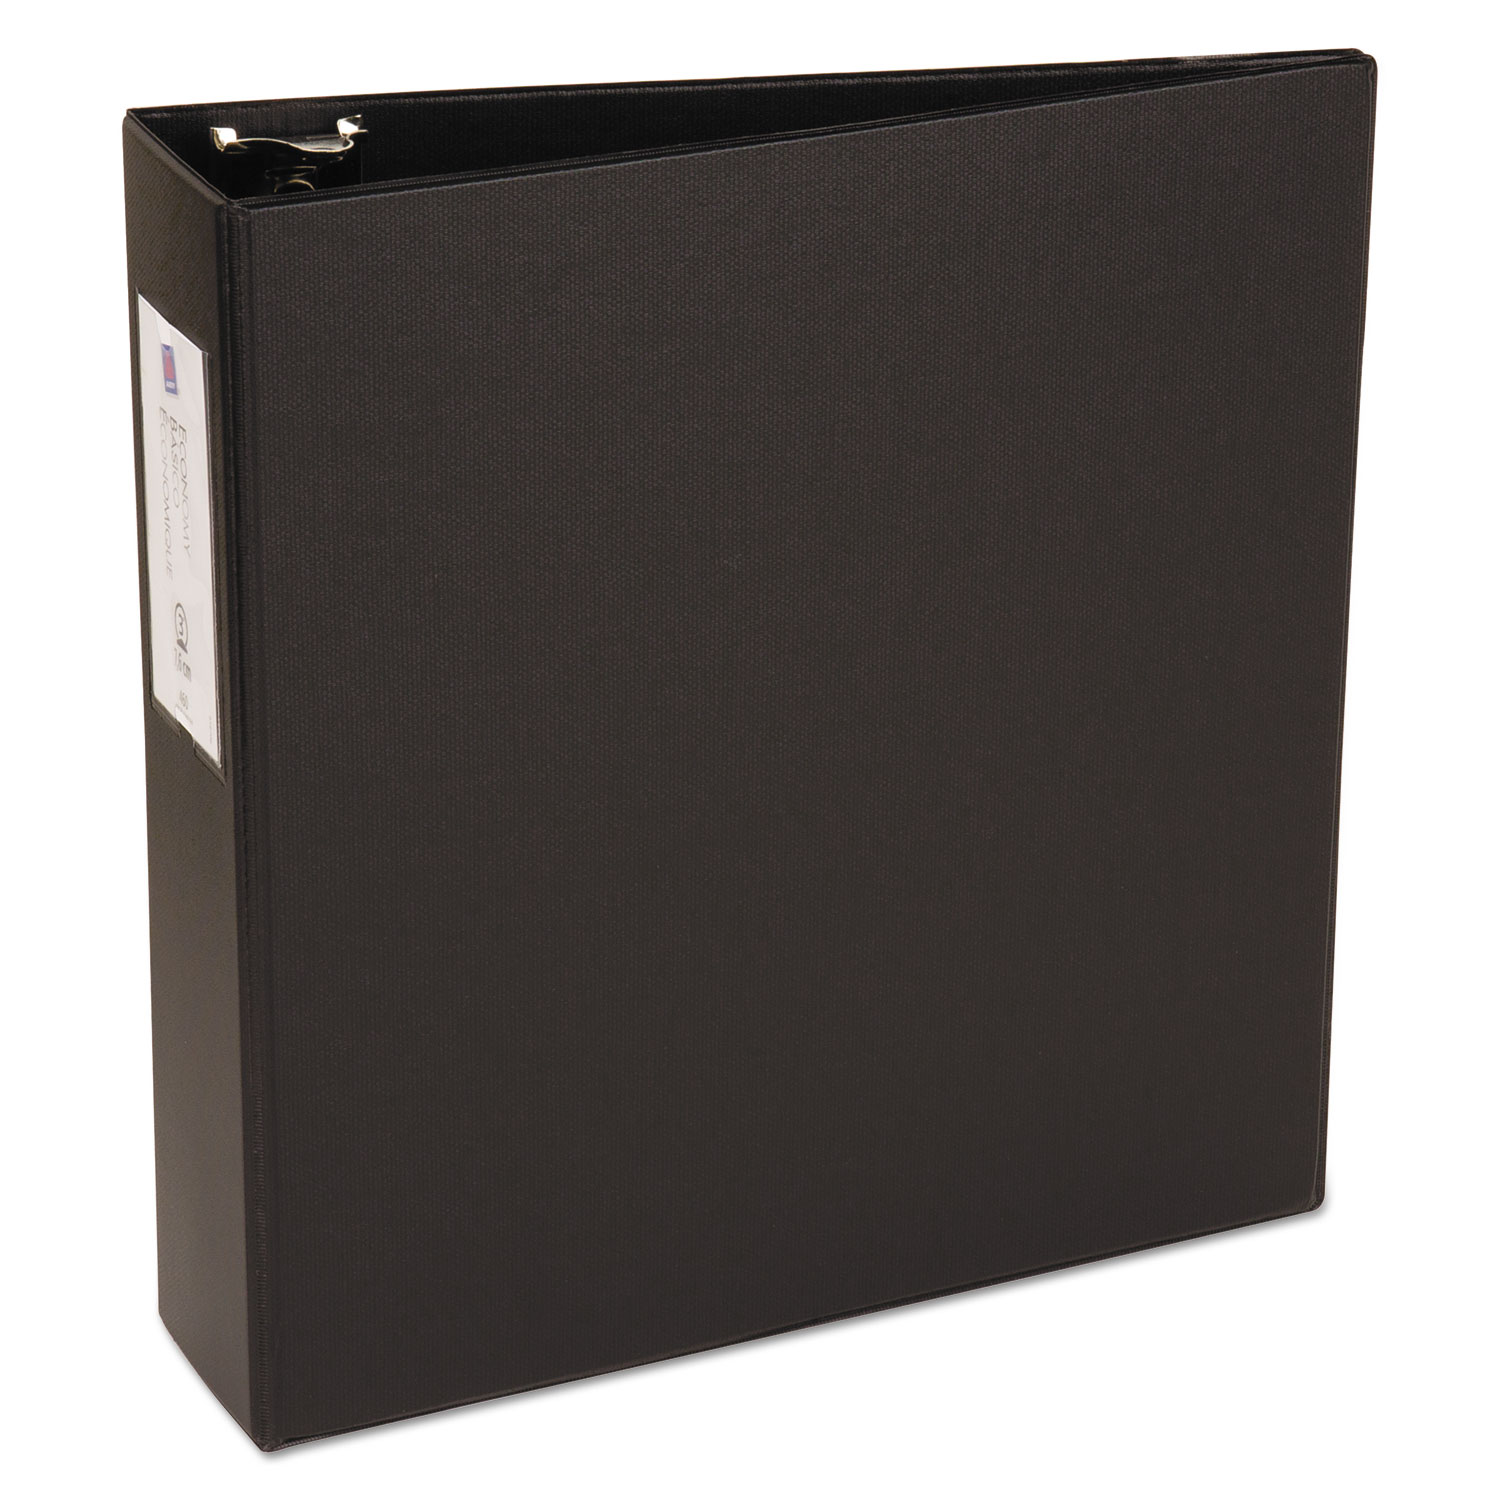  Avery 04601 Economy Non-View Binder with Round Rings, 3 Rings, 3 Capacity, 11 x 8.5, Black (AVE04601) 